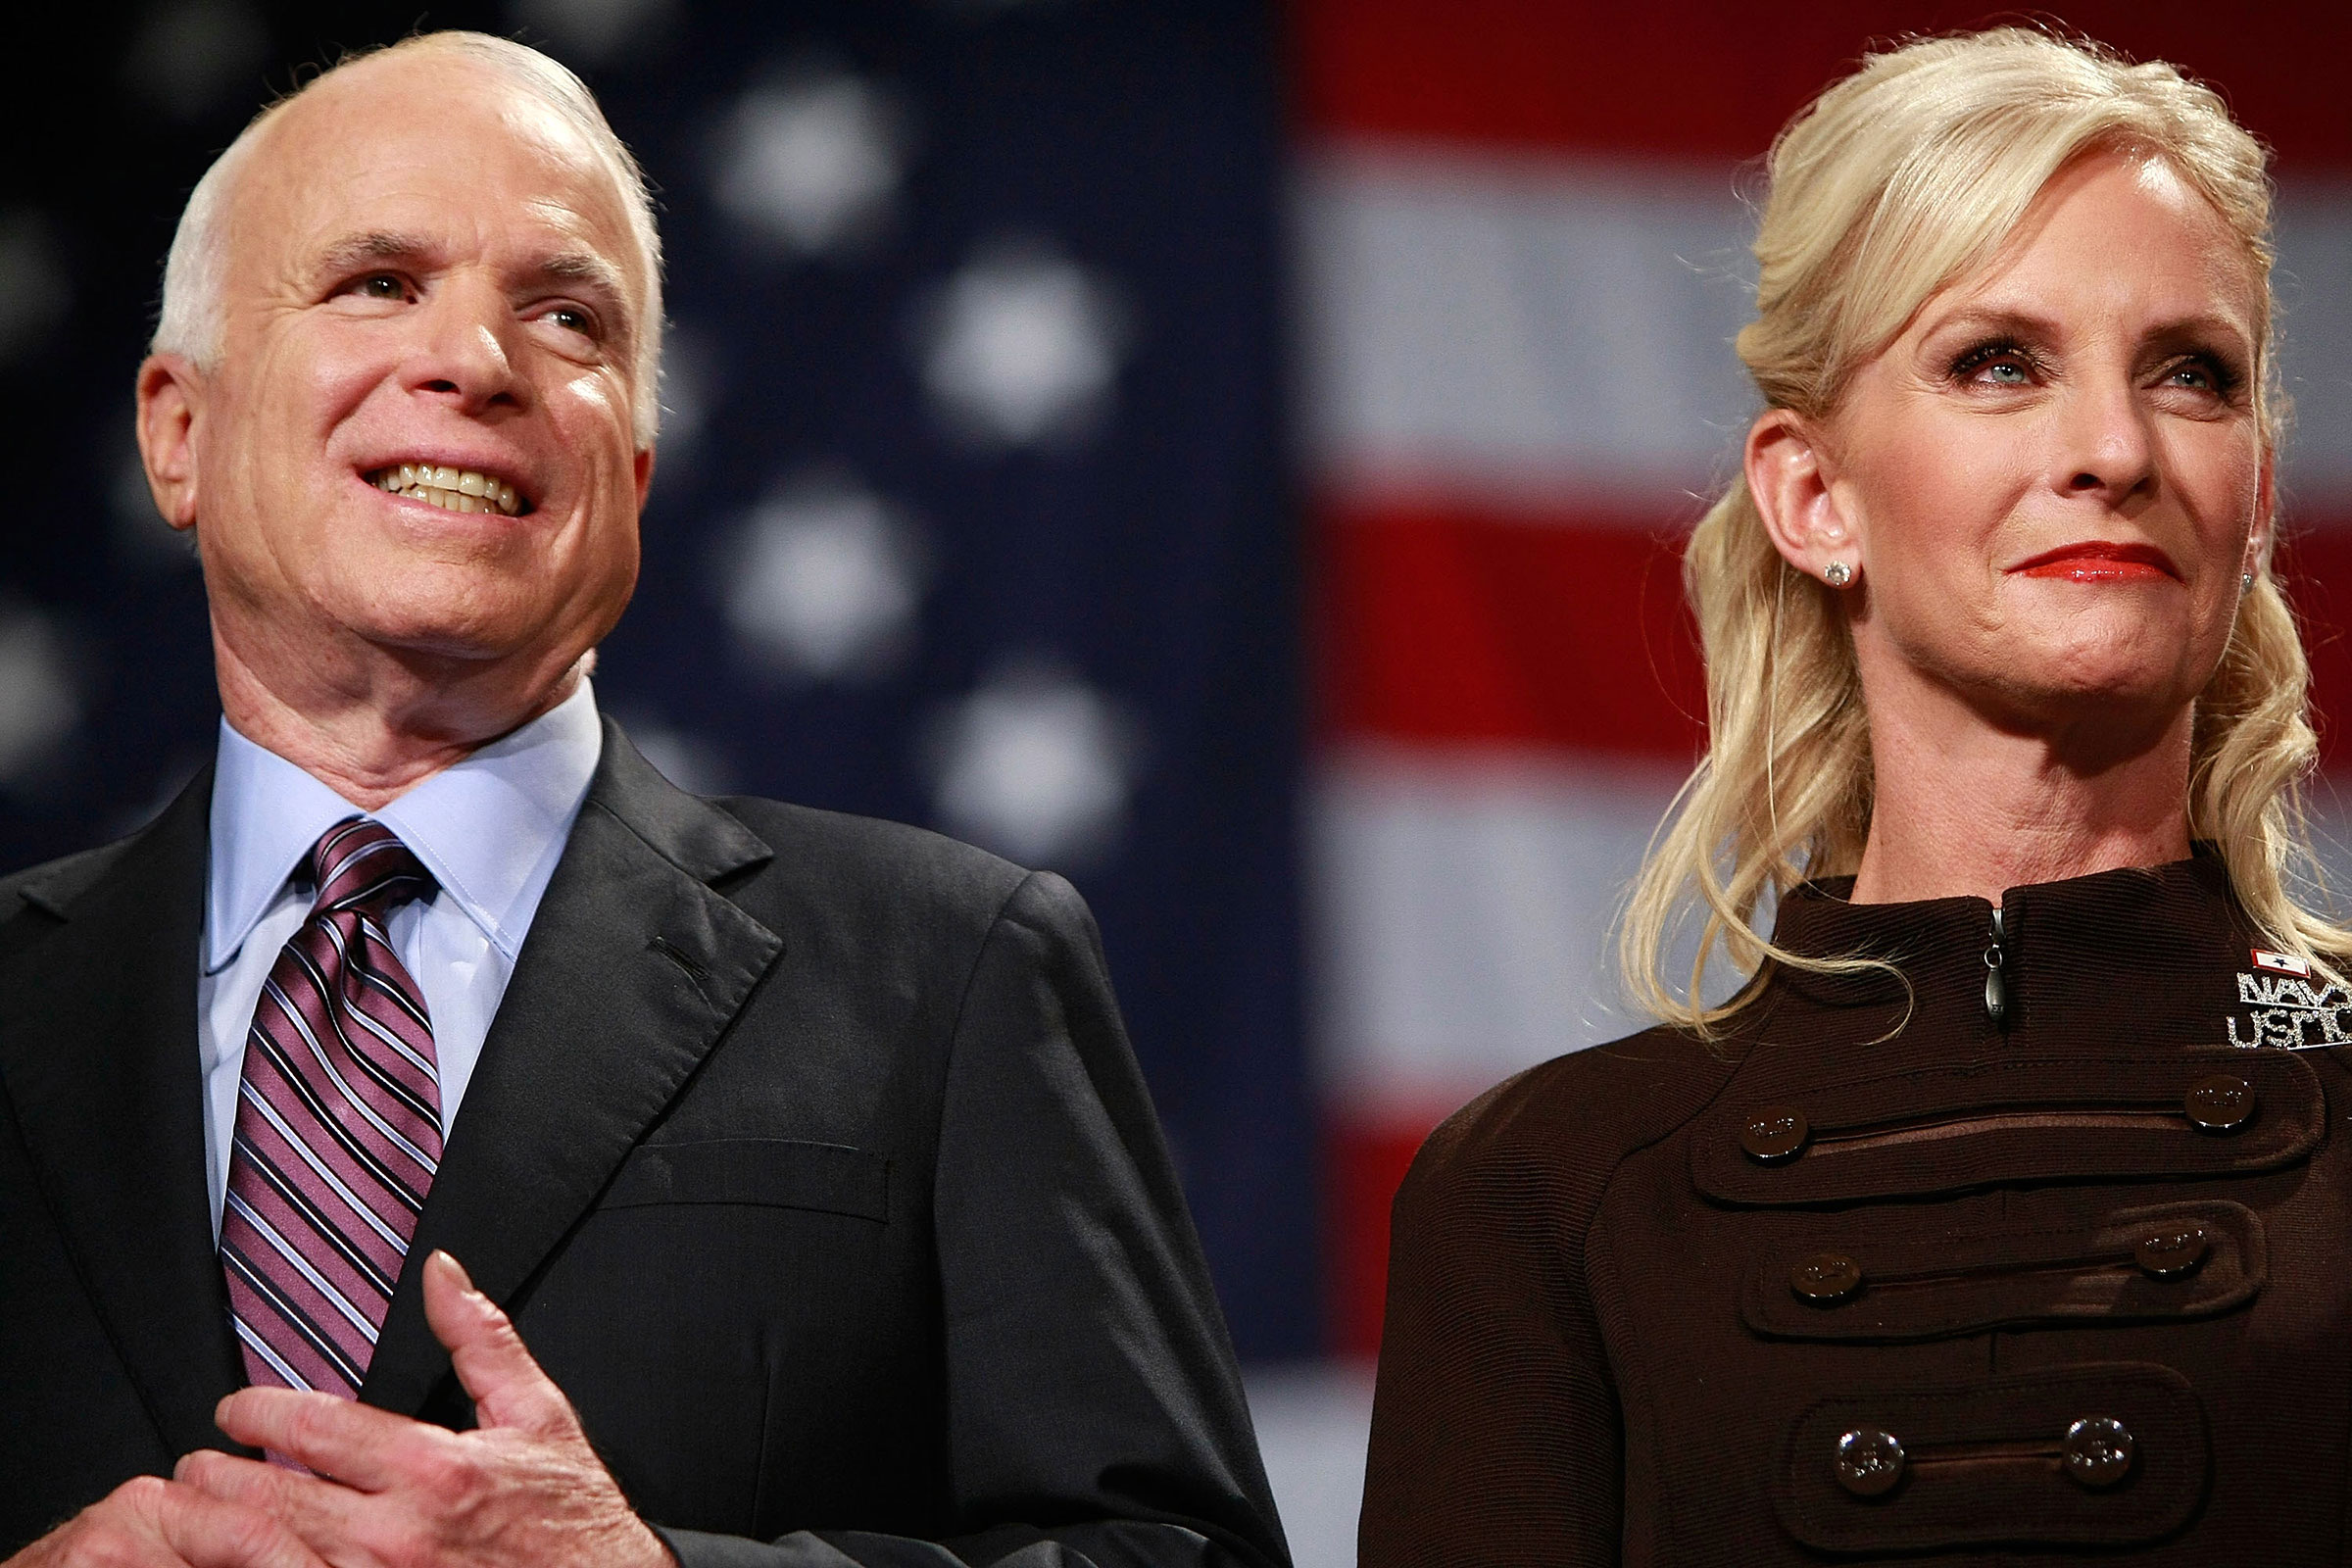 Then Republican presidential nominee Sen. John McCain and his wife Cindy McCain attend a rally in Thorndale, Pa. on Oc.t 16, 2008. (Chip Somodevilla—Getty Images)